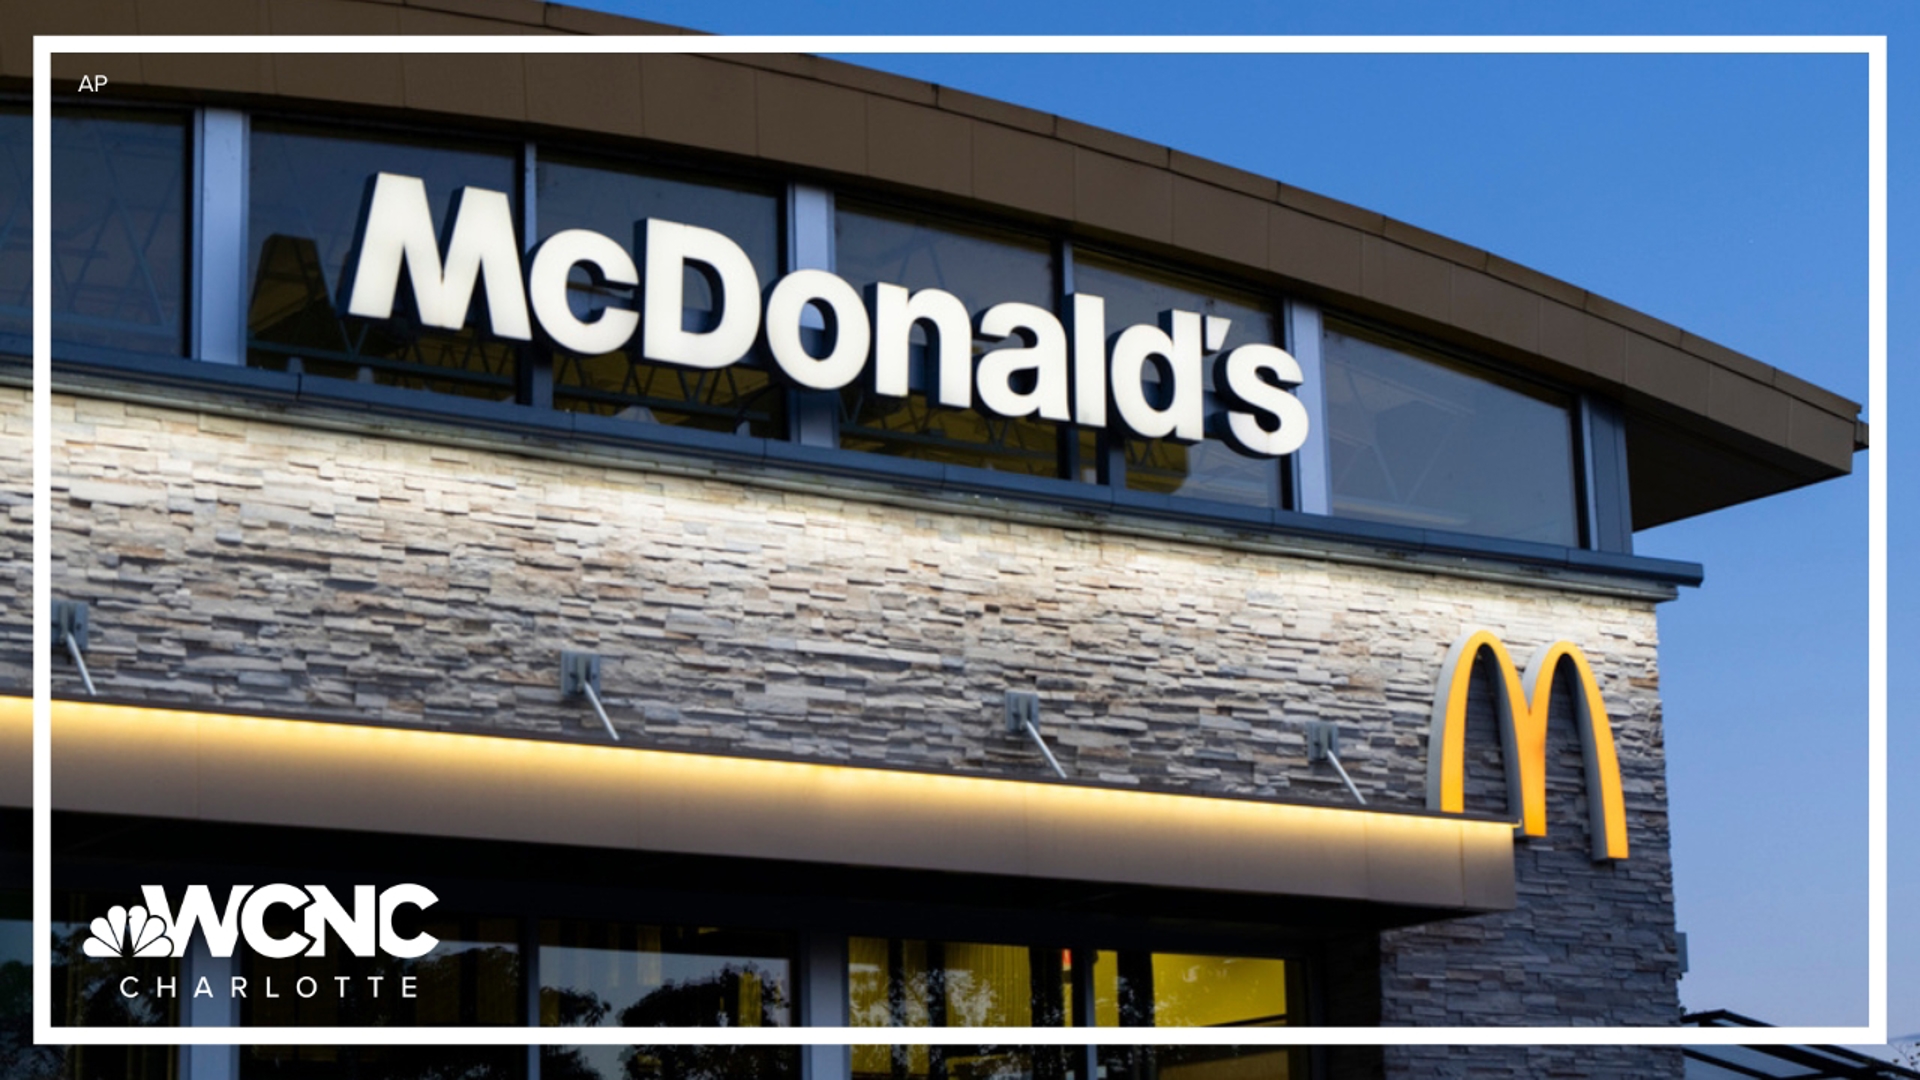 More than 30 Charlotte-area McDonald's locations will donate a portion of Tuesday's proceeds to benefit the families of officers killed on April 29.